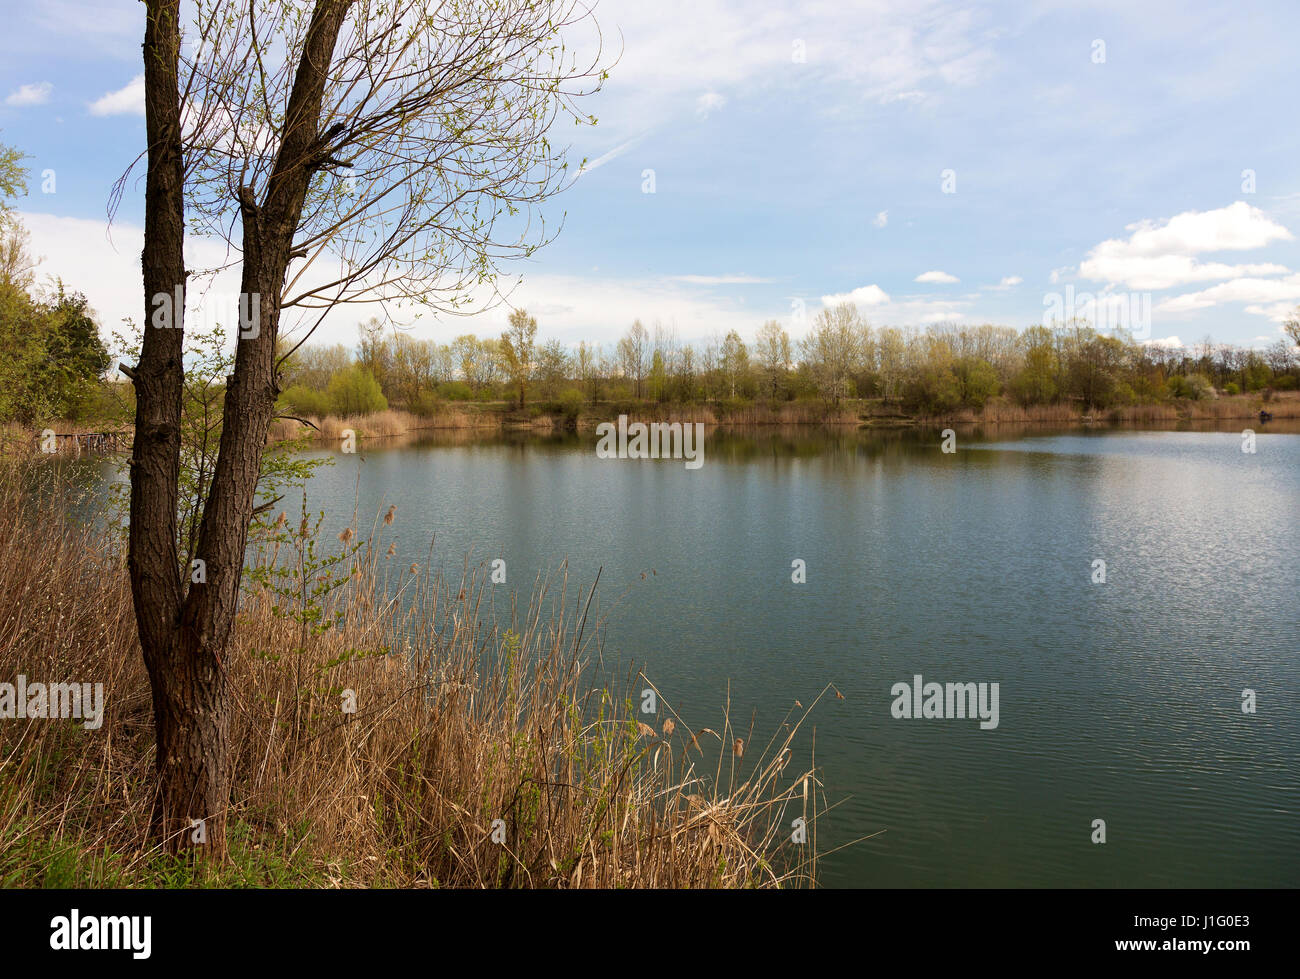 Coastal scrub, dry reed and tree on the banks of a pond, early spring in a beautiful, sunny day with white clouds against the blue sky. Poland ,april Stock Photo